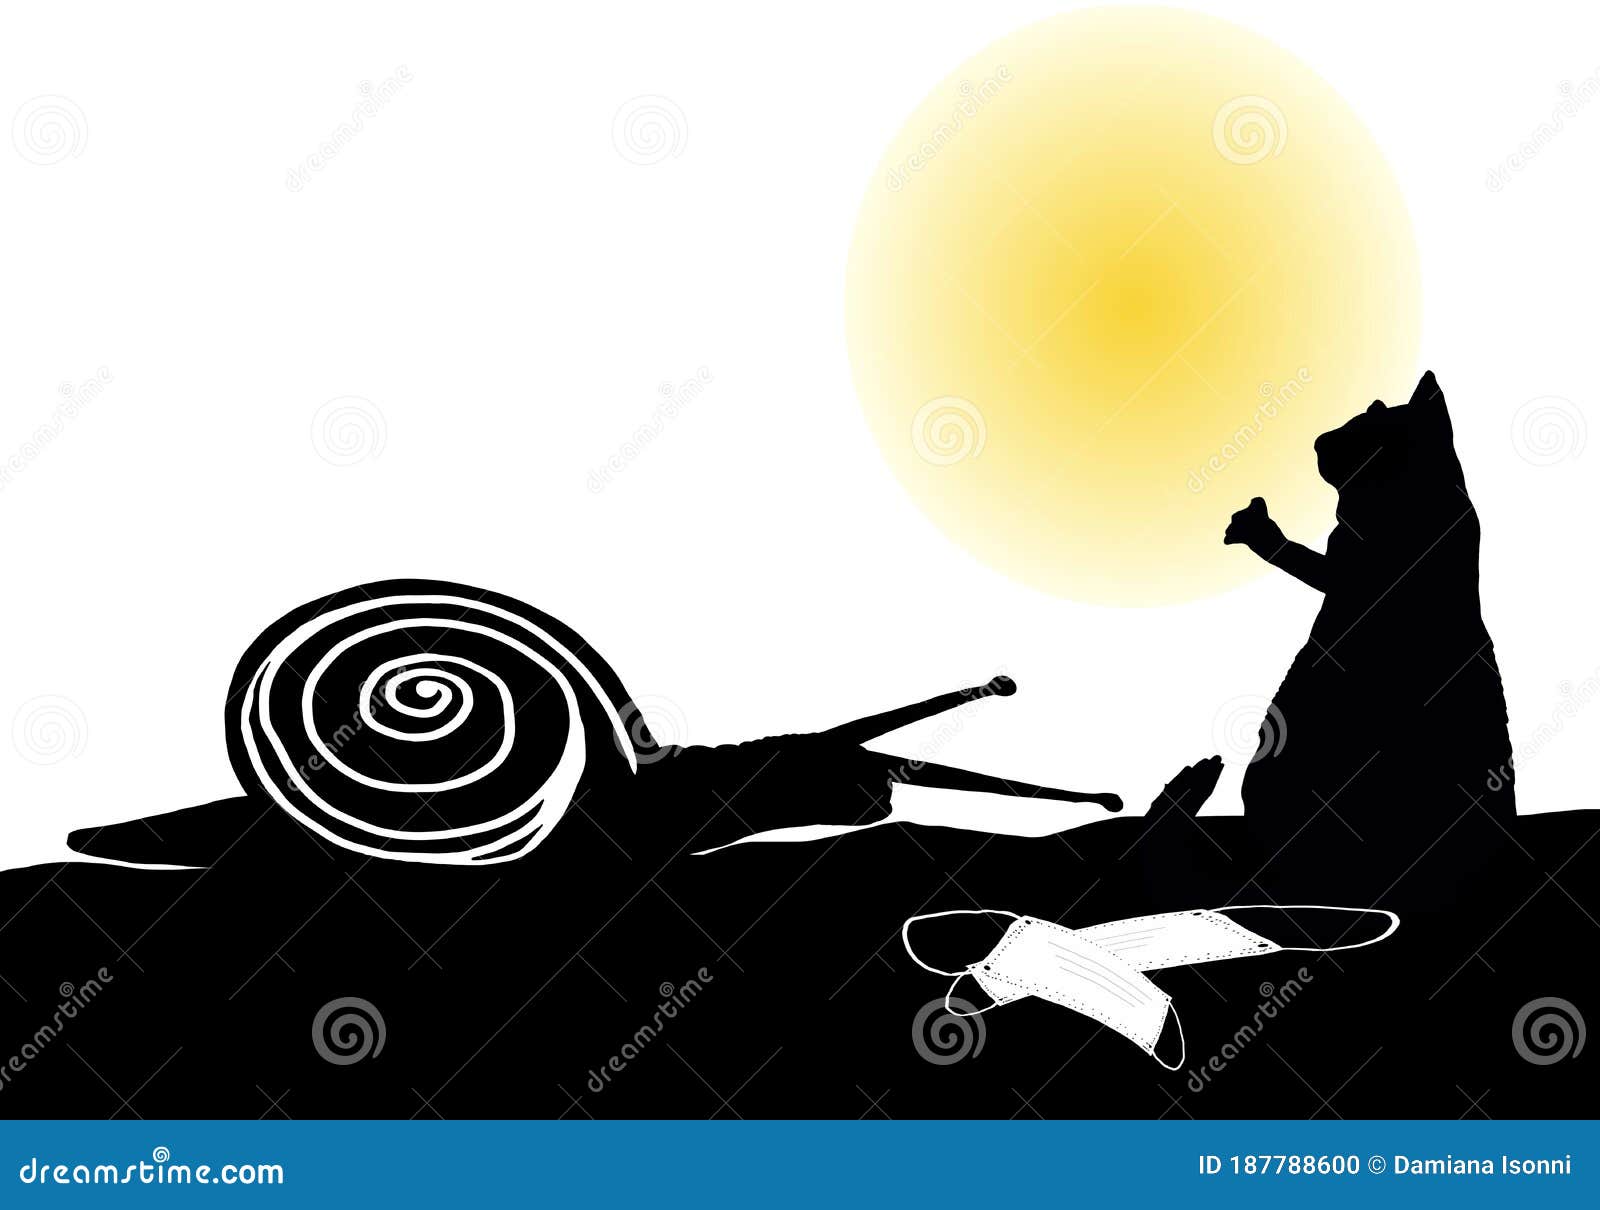 snail and cat with masks on the ground with sun